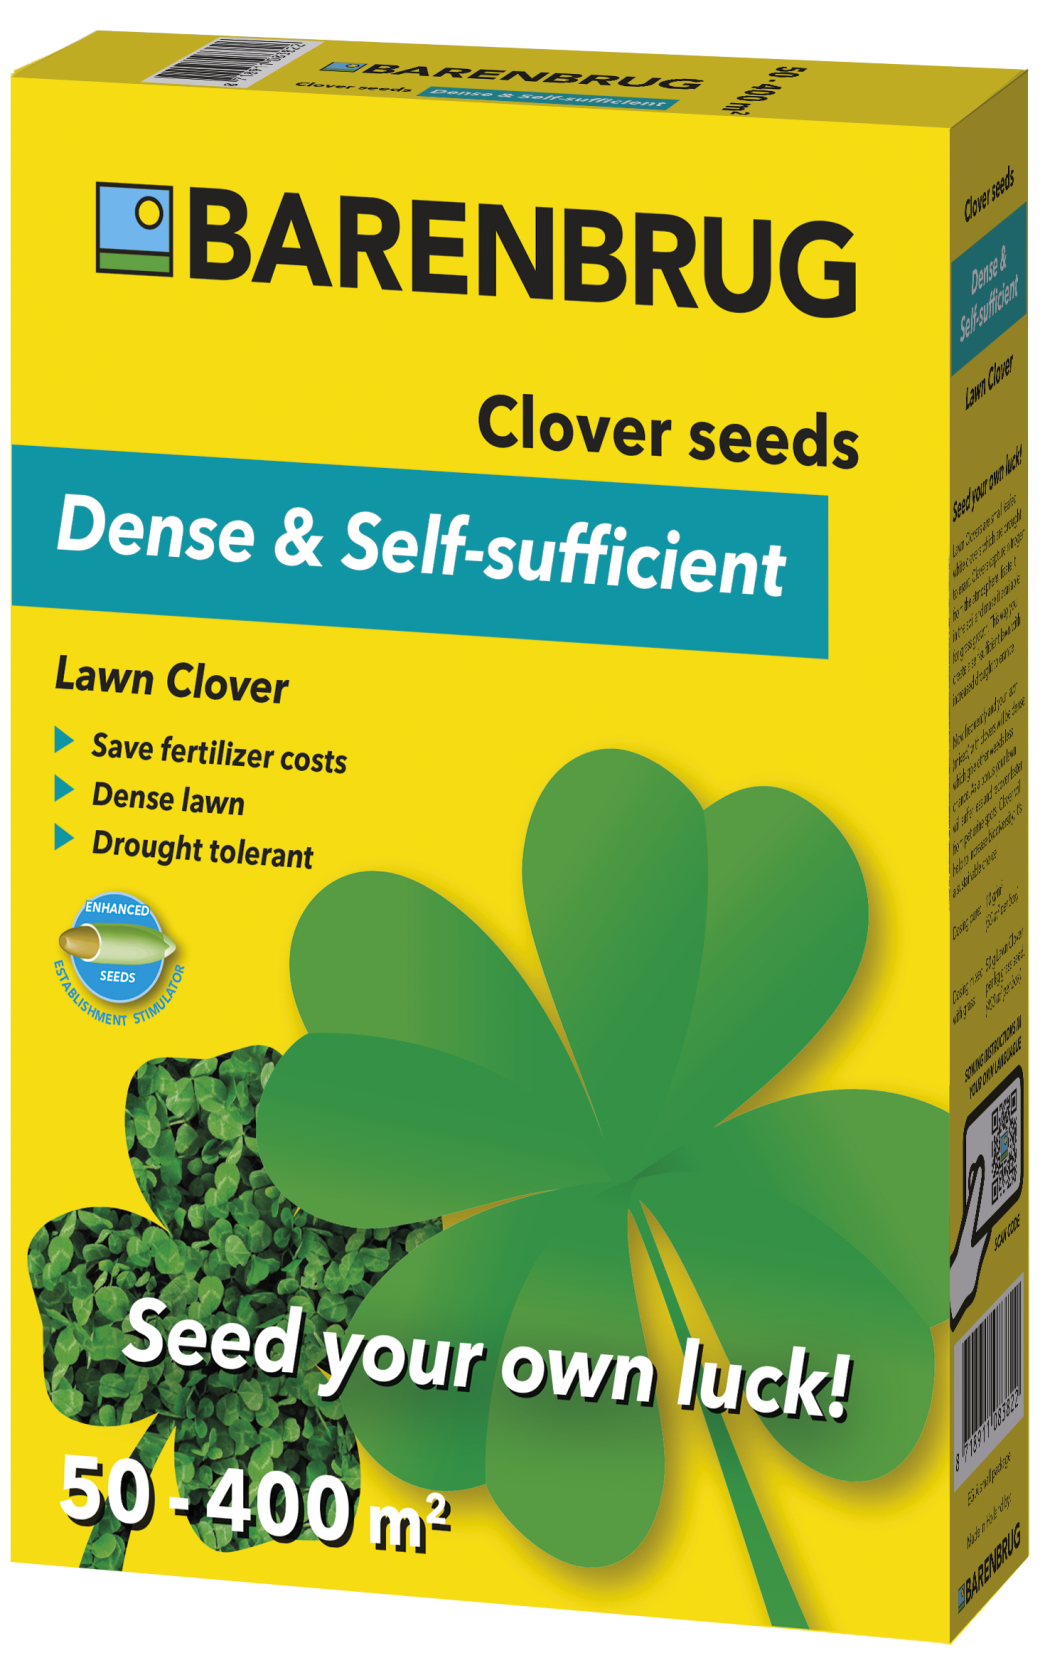 Barenbrug grass seed Lawn Clover Yellow Jacket - Create a self-sustaining lawn - 0.5kg (50 to 400m²)